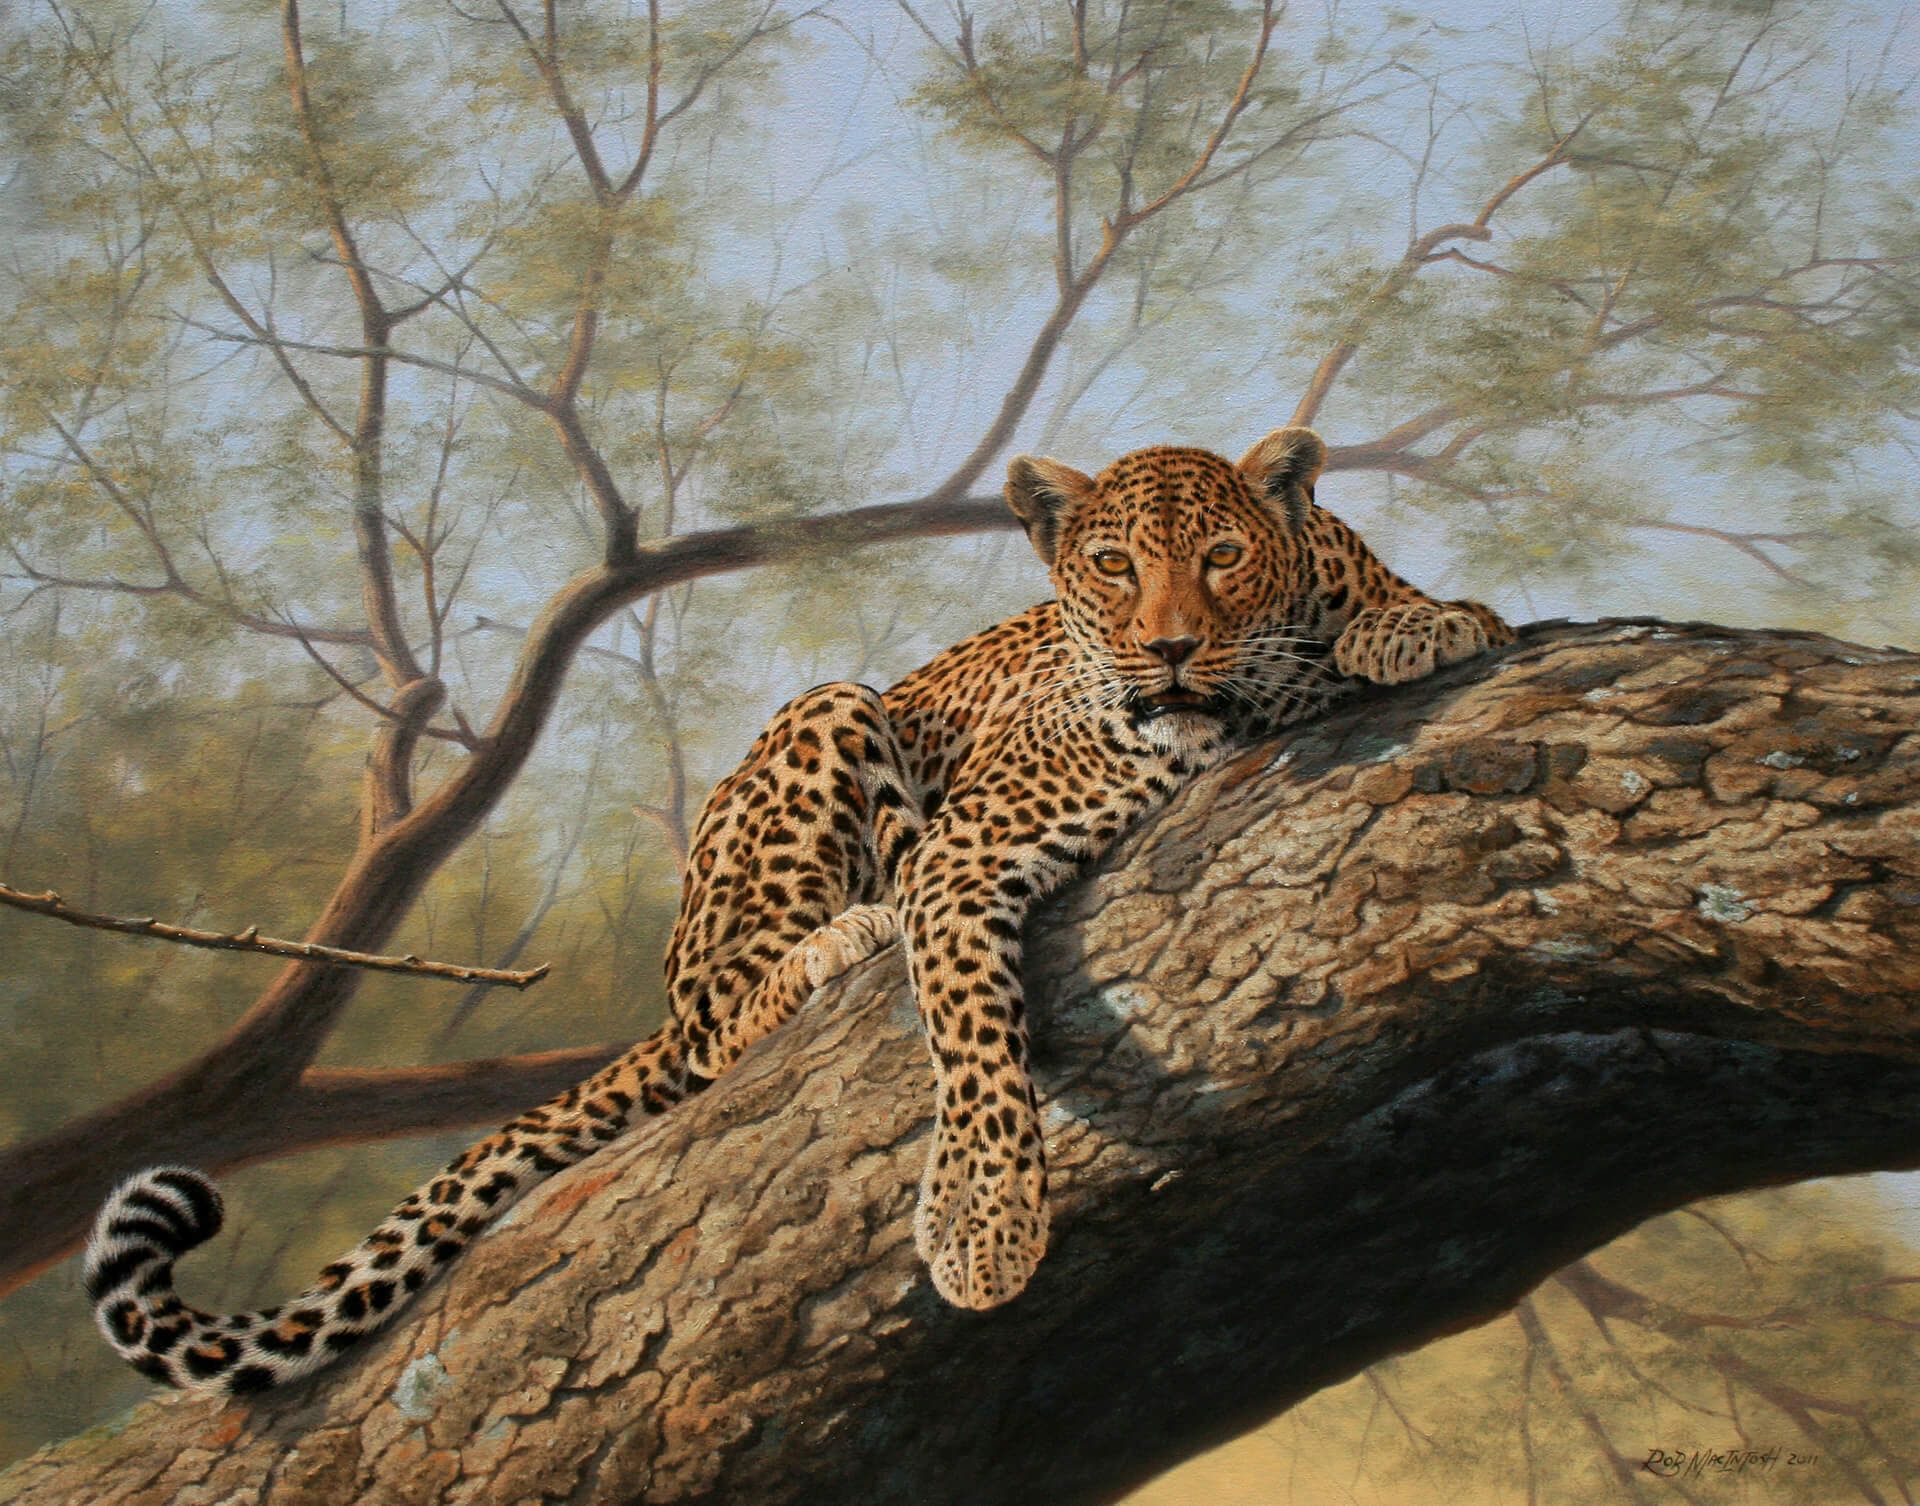 Photorealistic painting of a jaguar perched in tree